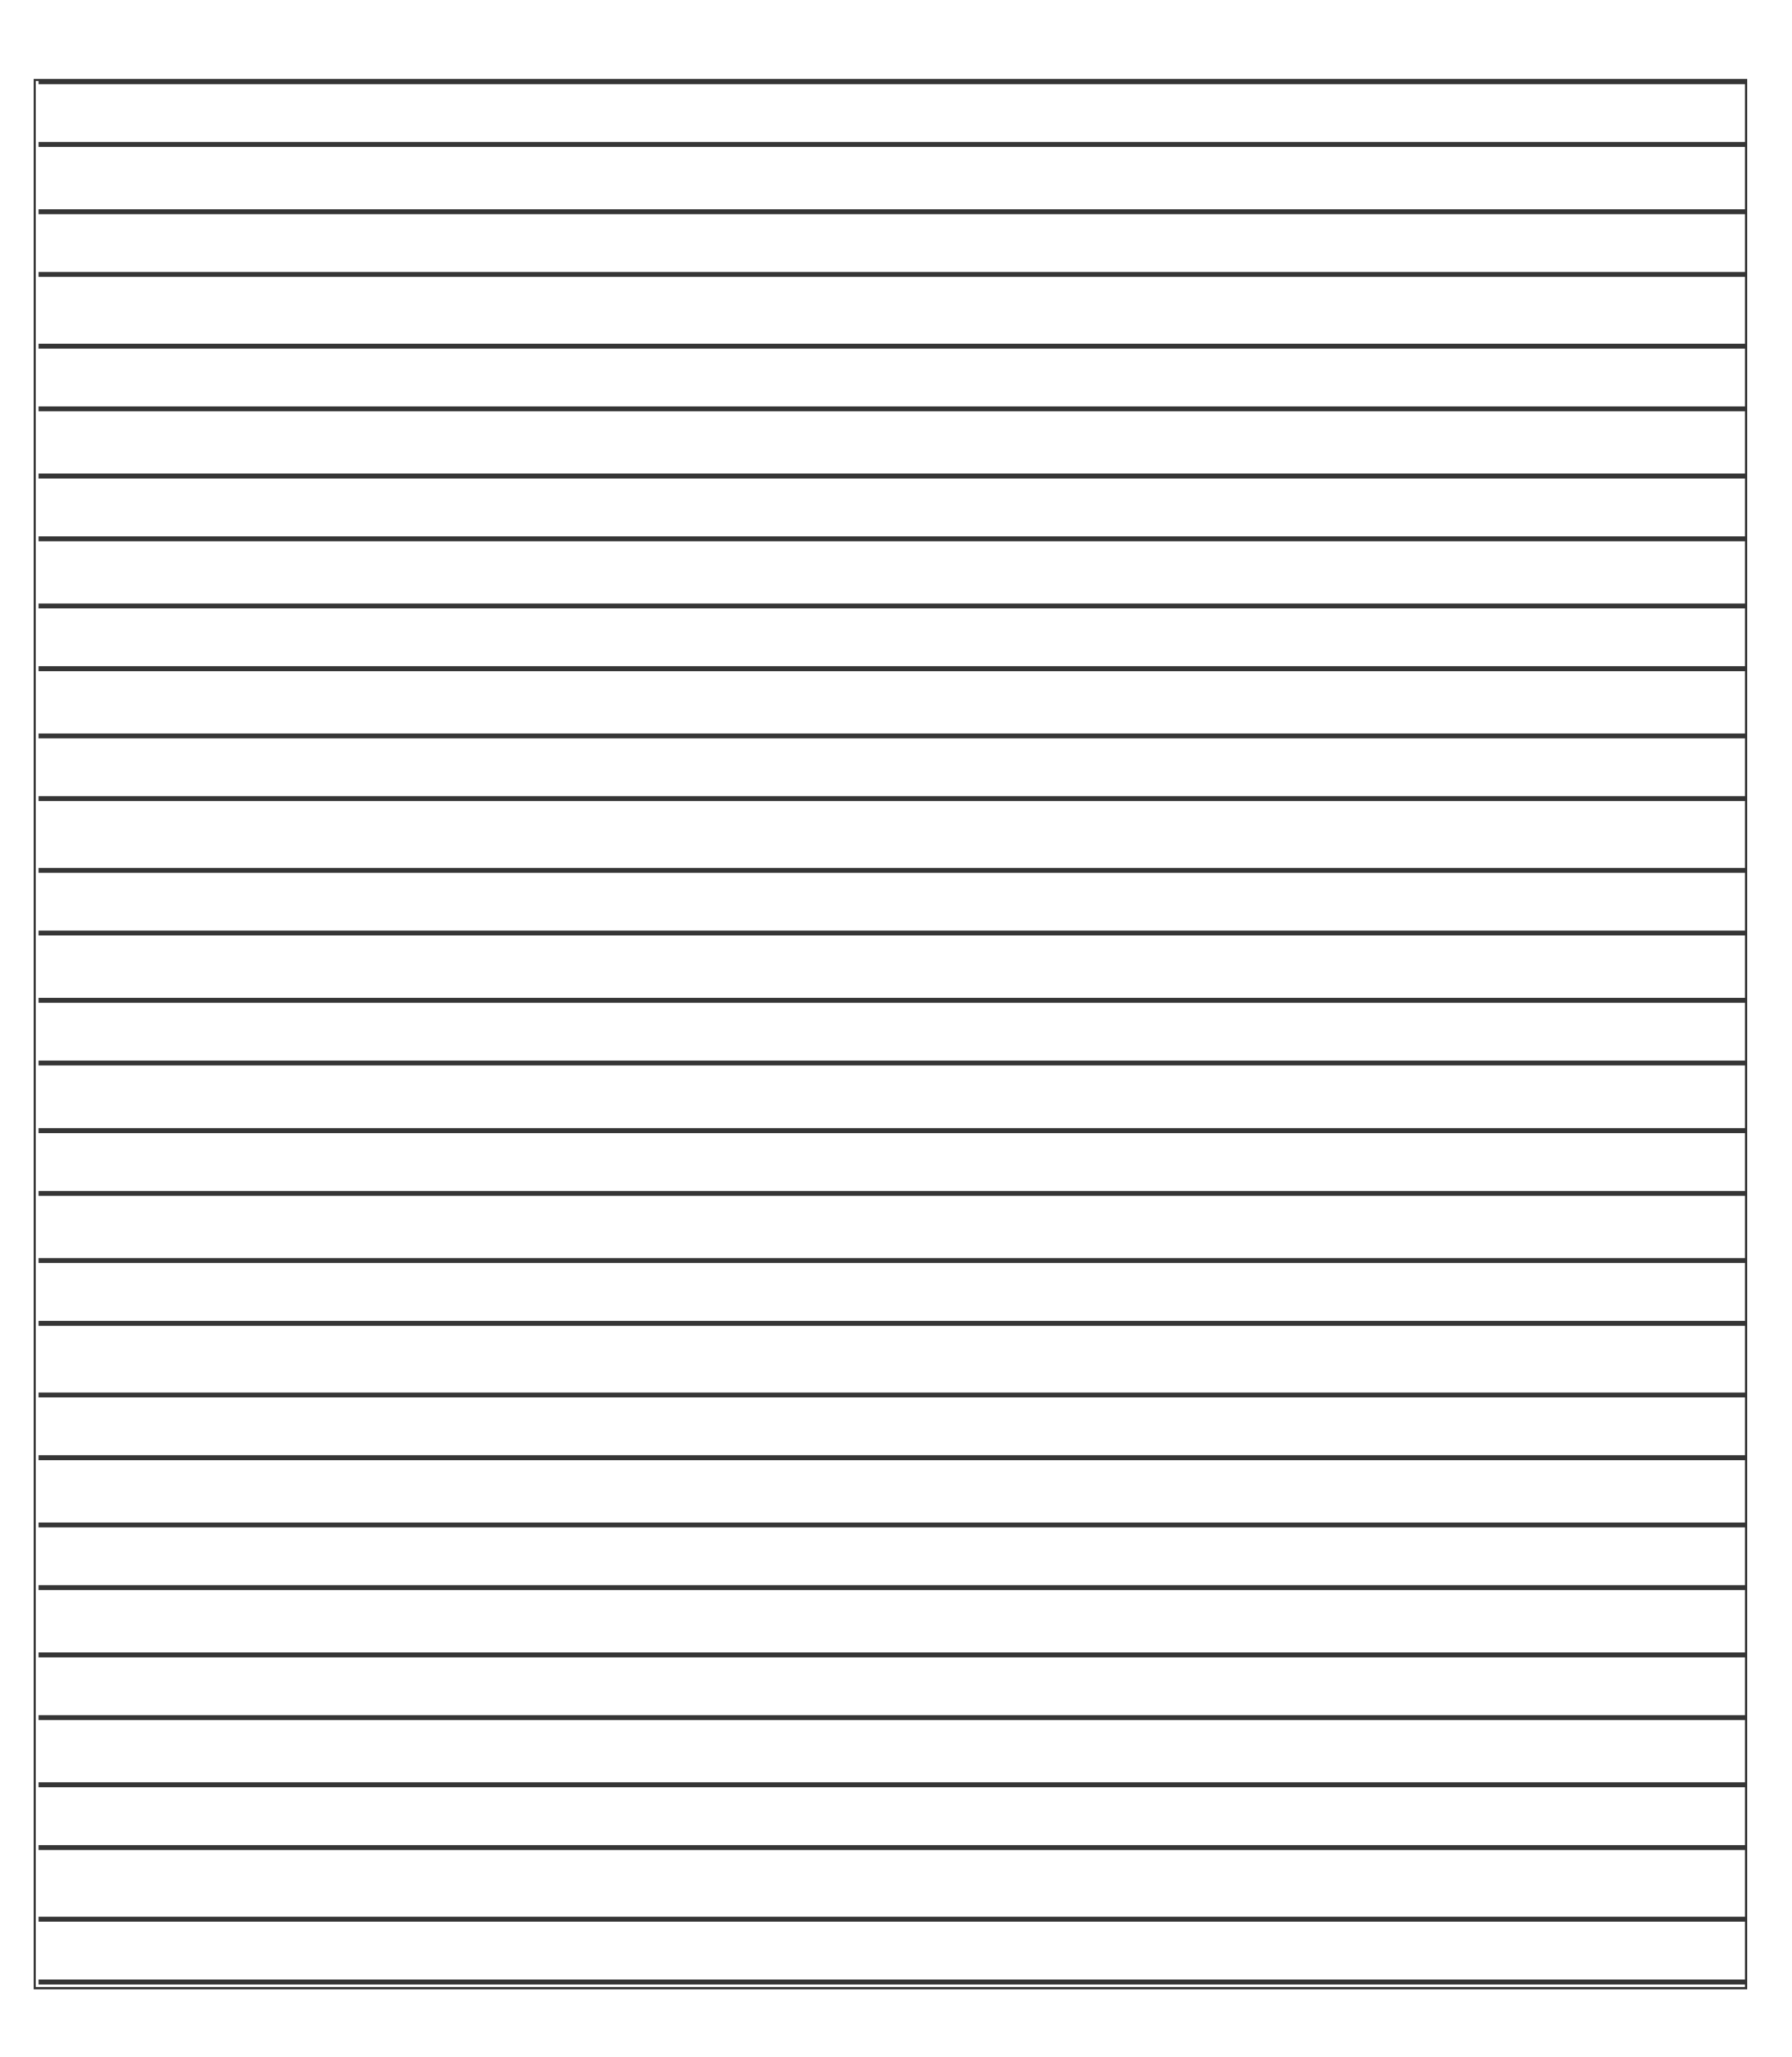 ❤️20+ Free Printable Blank Lined Paper Template In Pdf❤️ Regarding Microsoft Word Lined Paper Template